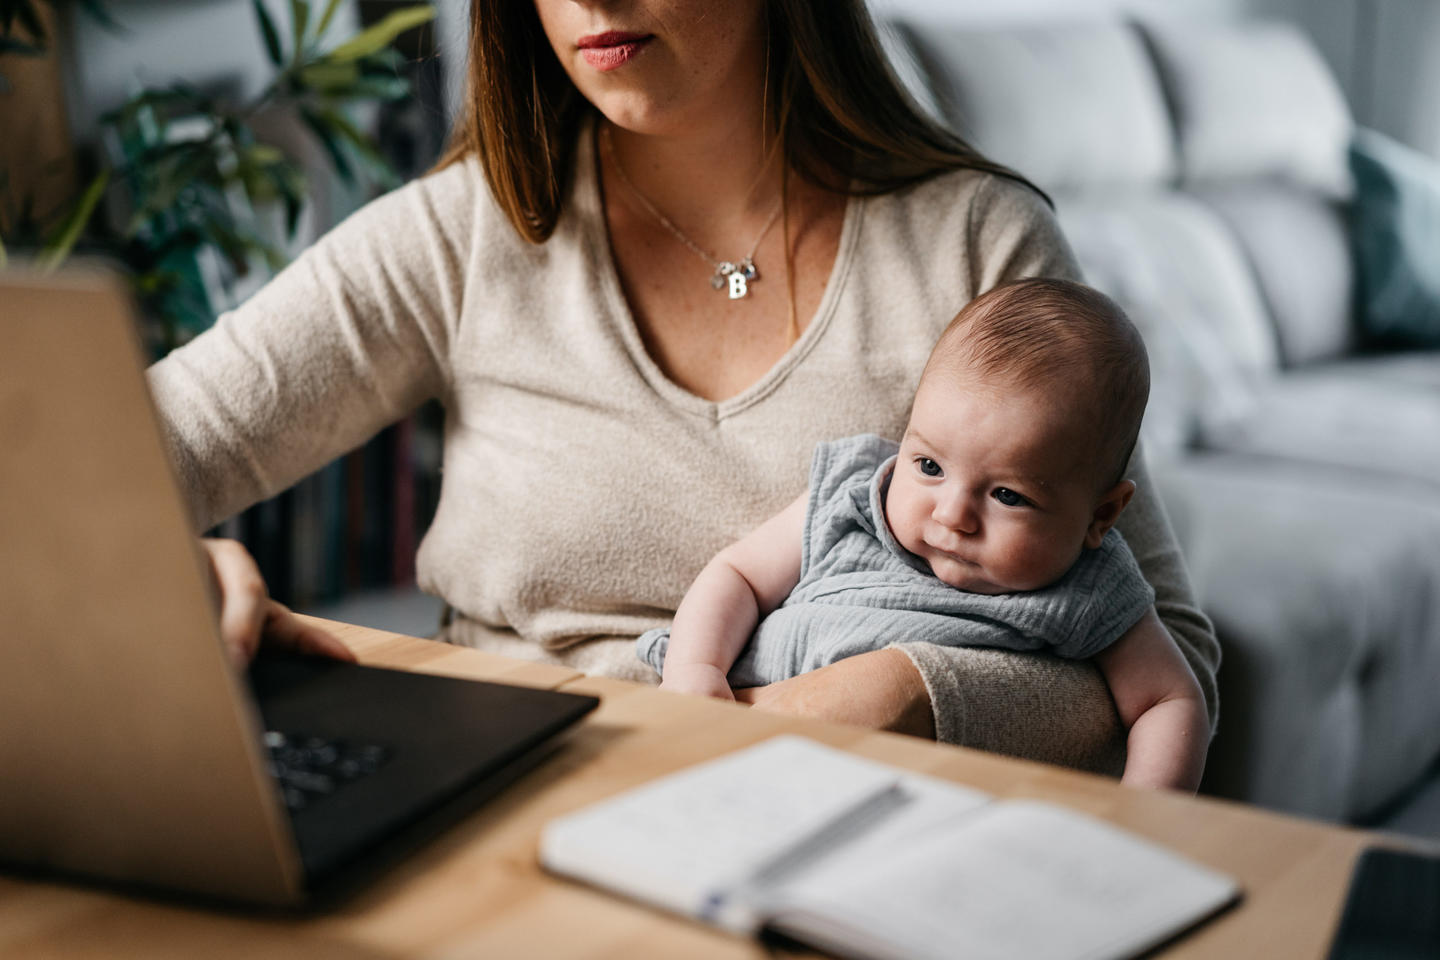 A woman on a laptop holding a baby